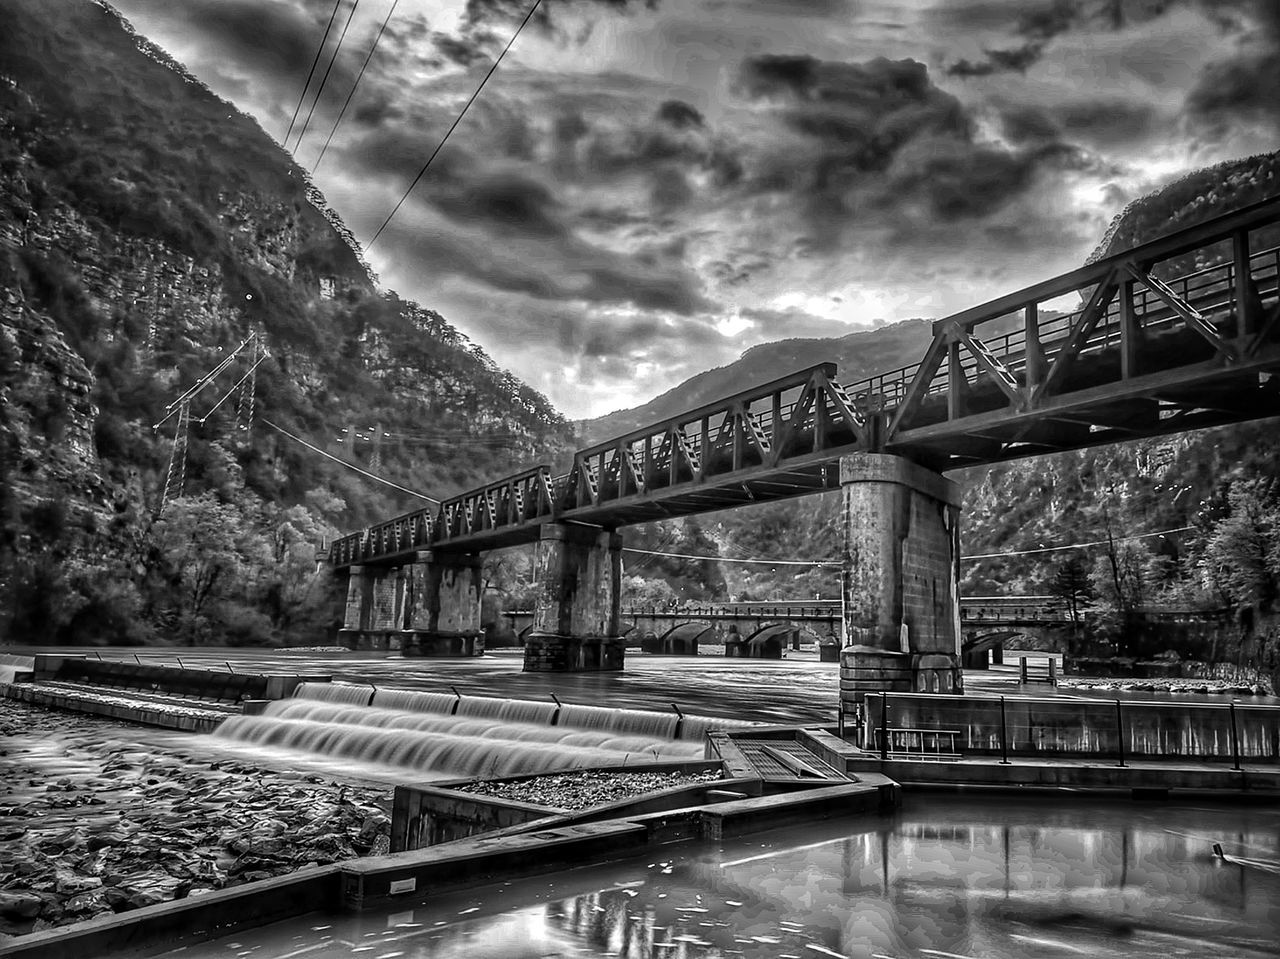 cloud, architecture, black and white, water, built structure, bridge, monochrome, sky, monochrome photography, nature, reflection, transportation, cityscape, no people, rail transportation, tree, river, travel destinations, plant, darkness, transport, outdoors, travel, building exterior, urban area, city, beauty in nature, mountain, scenics - nature, day